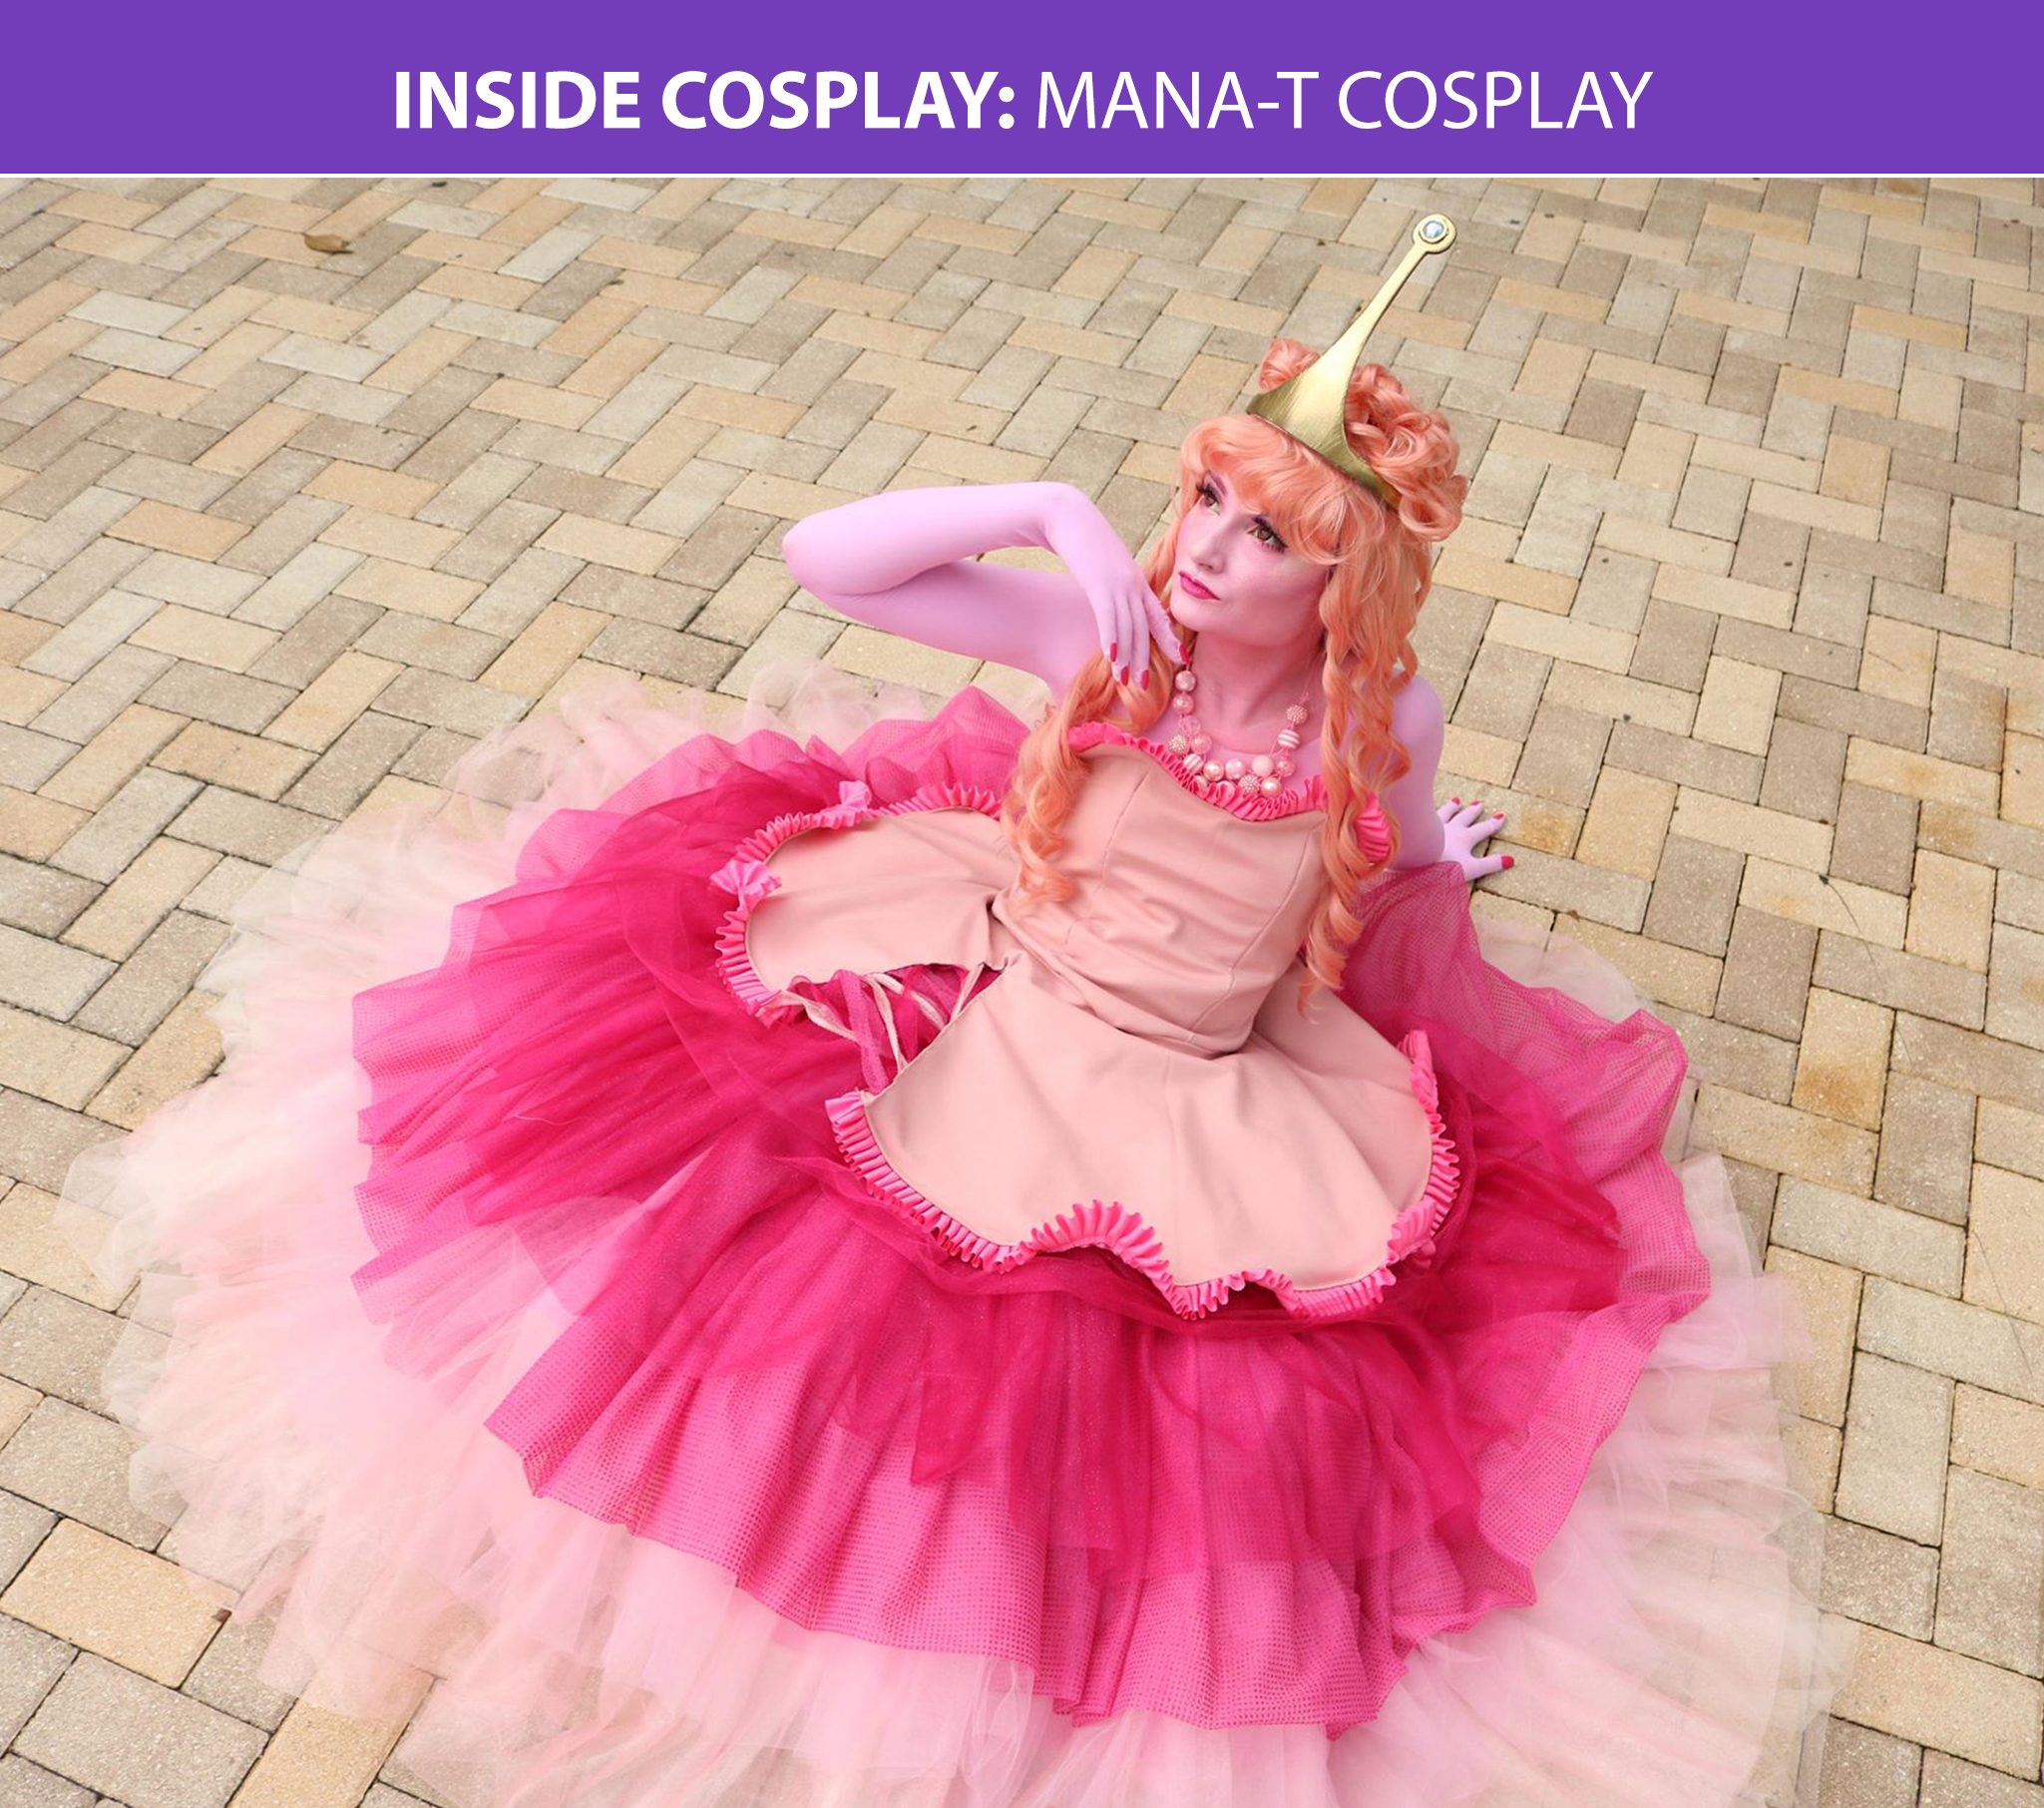 Manatcosplay Inside Cosplay Cover1 1